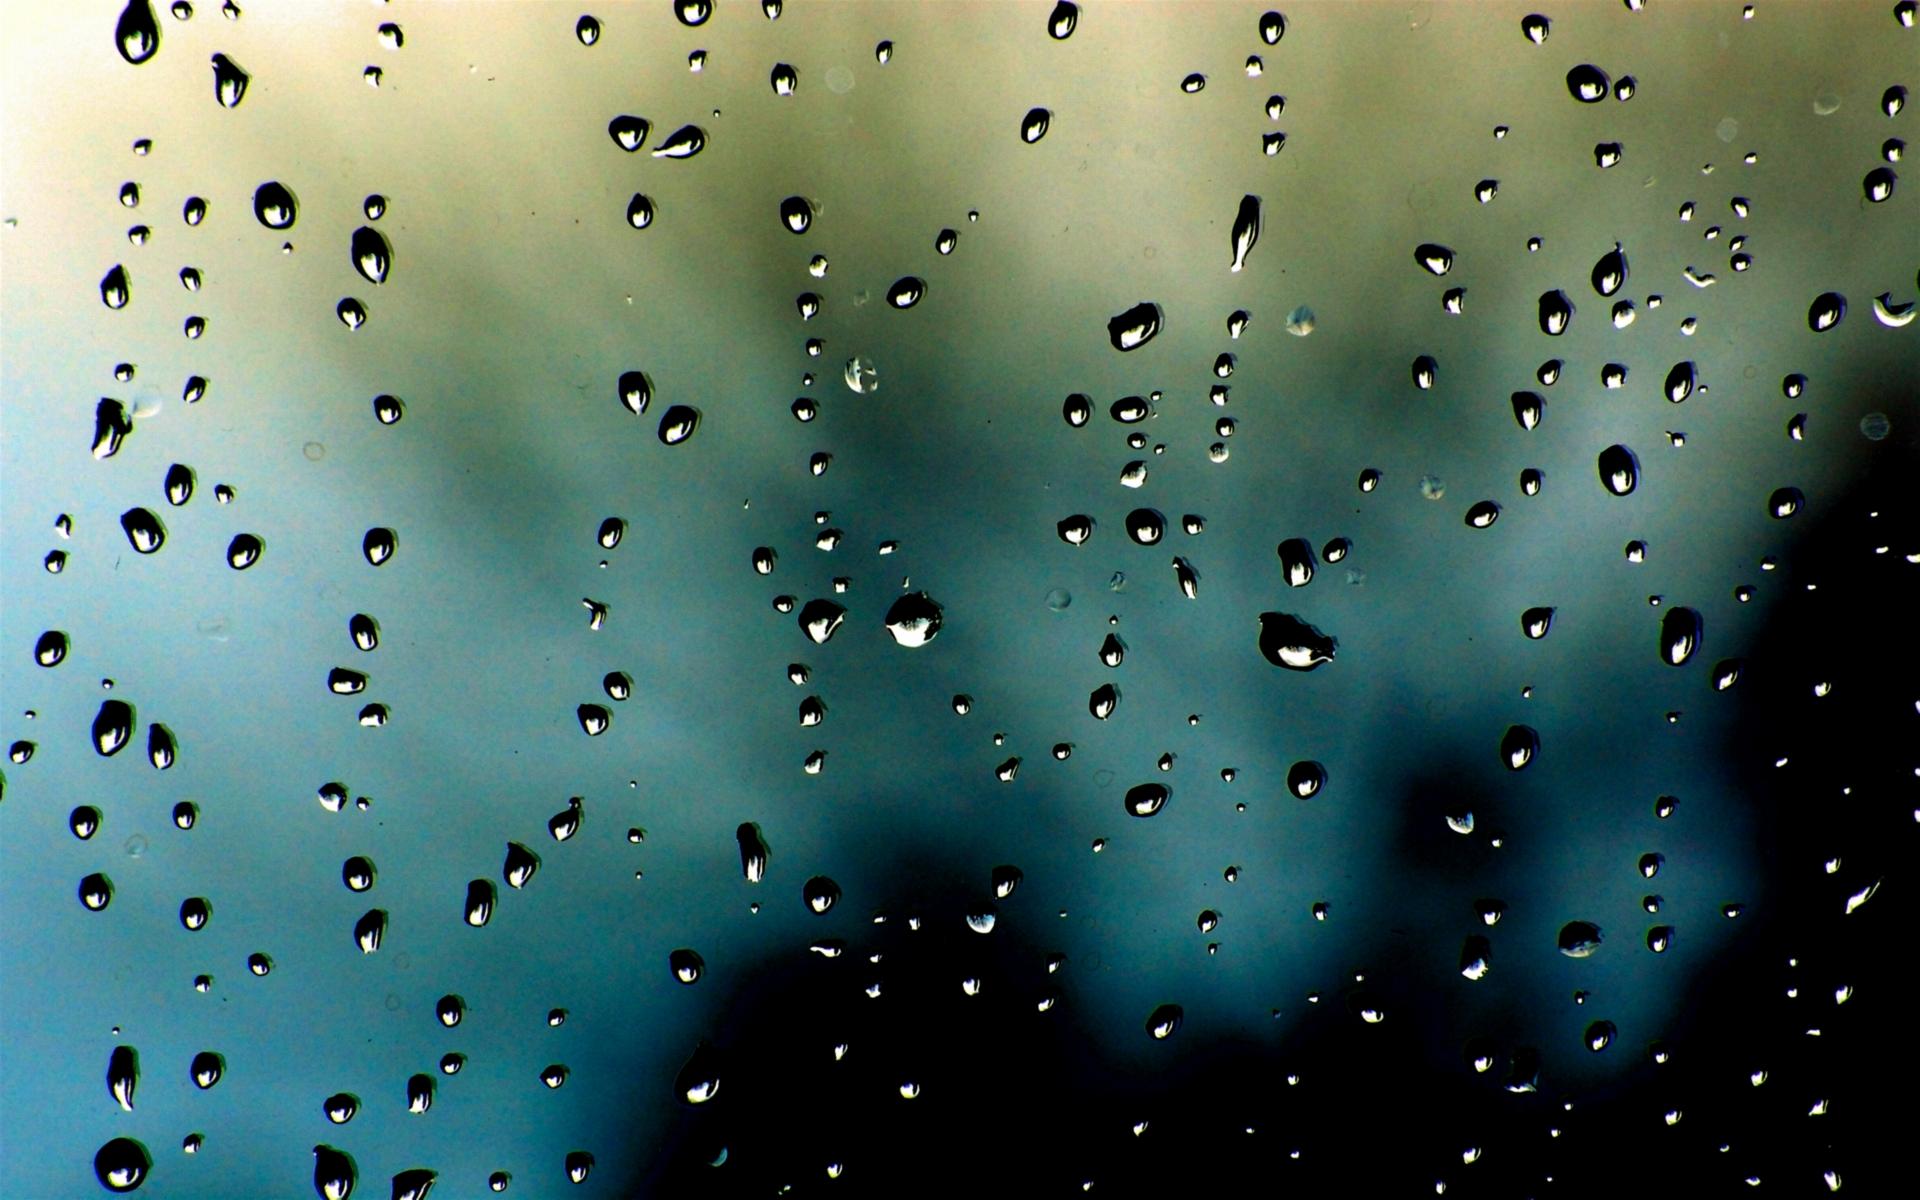 Droplets wallpapers | Droplets stock photos